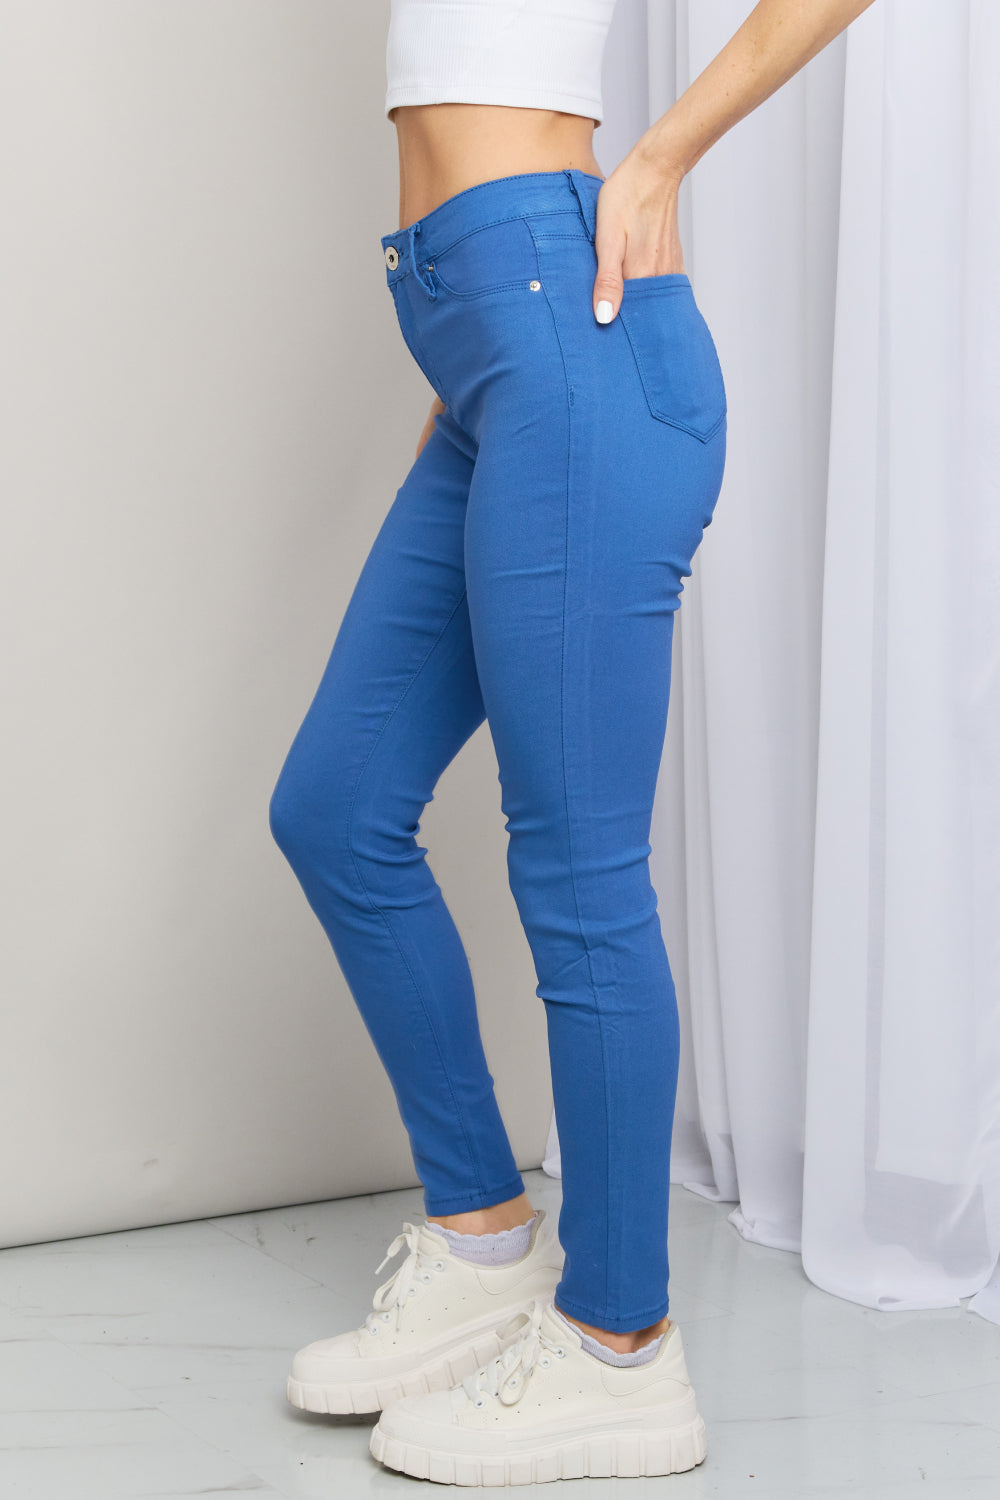 Kate Hyper-Stretch Full Size Mid-Rise Skinny Jeans in Electric Blue | Jeans - CHANELIA